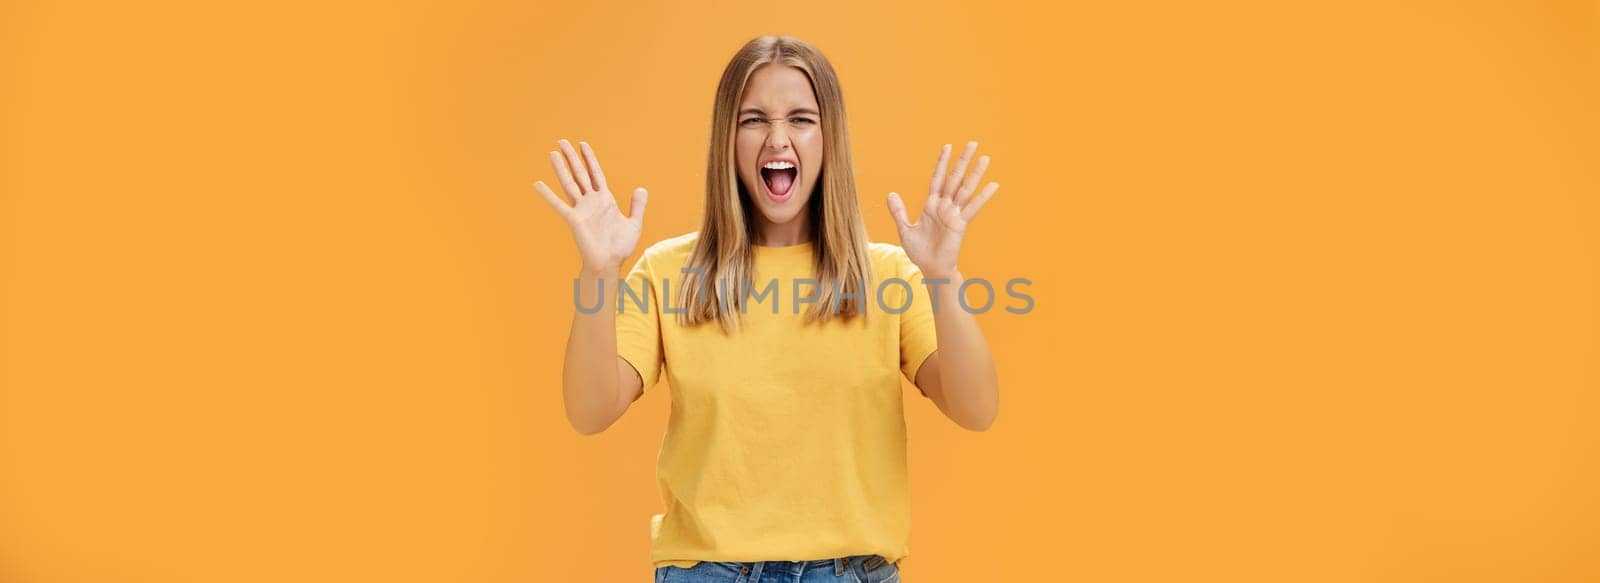 Woman releasing stress yelling with joy and pleasure gesturing with raised arms being daring and rebellious not afraid to show emotions standing passionate and expressive against orange background by Benzoix